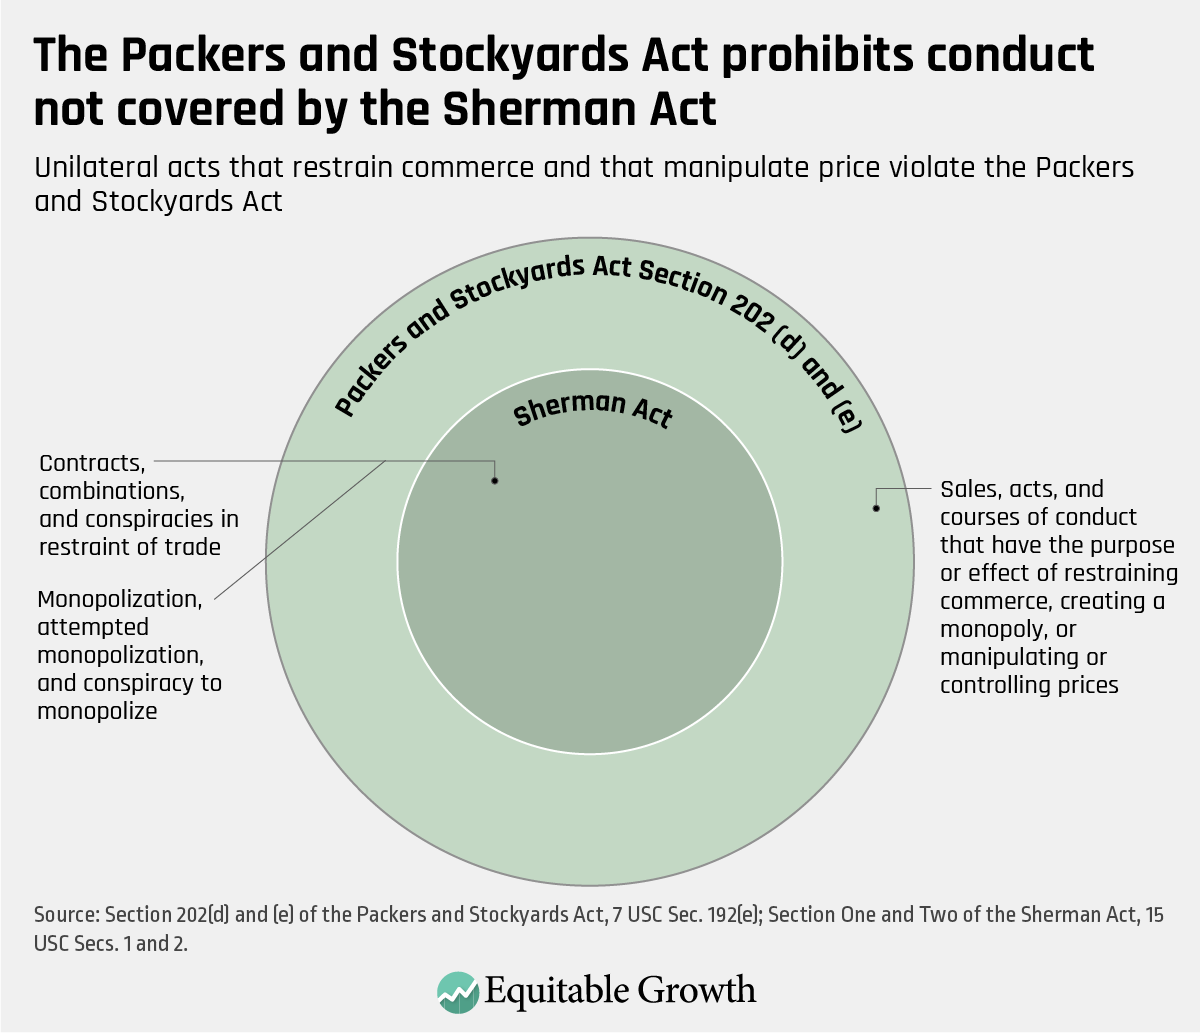 Unilateral acts that restrain commerce and that manipulate price violate the Packers and Stockyards Act